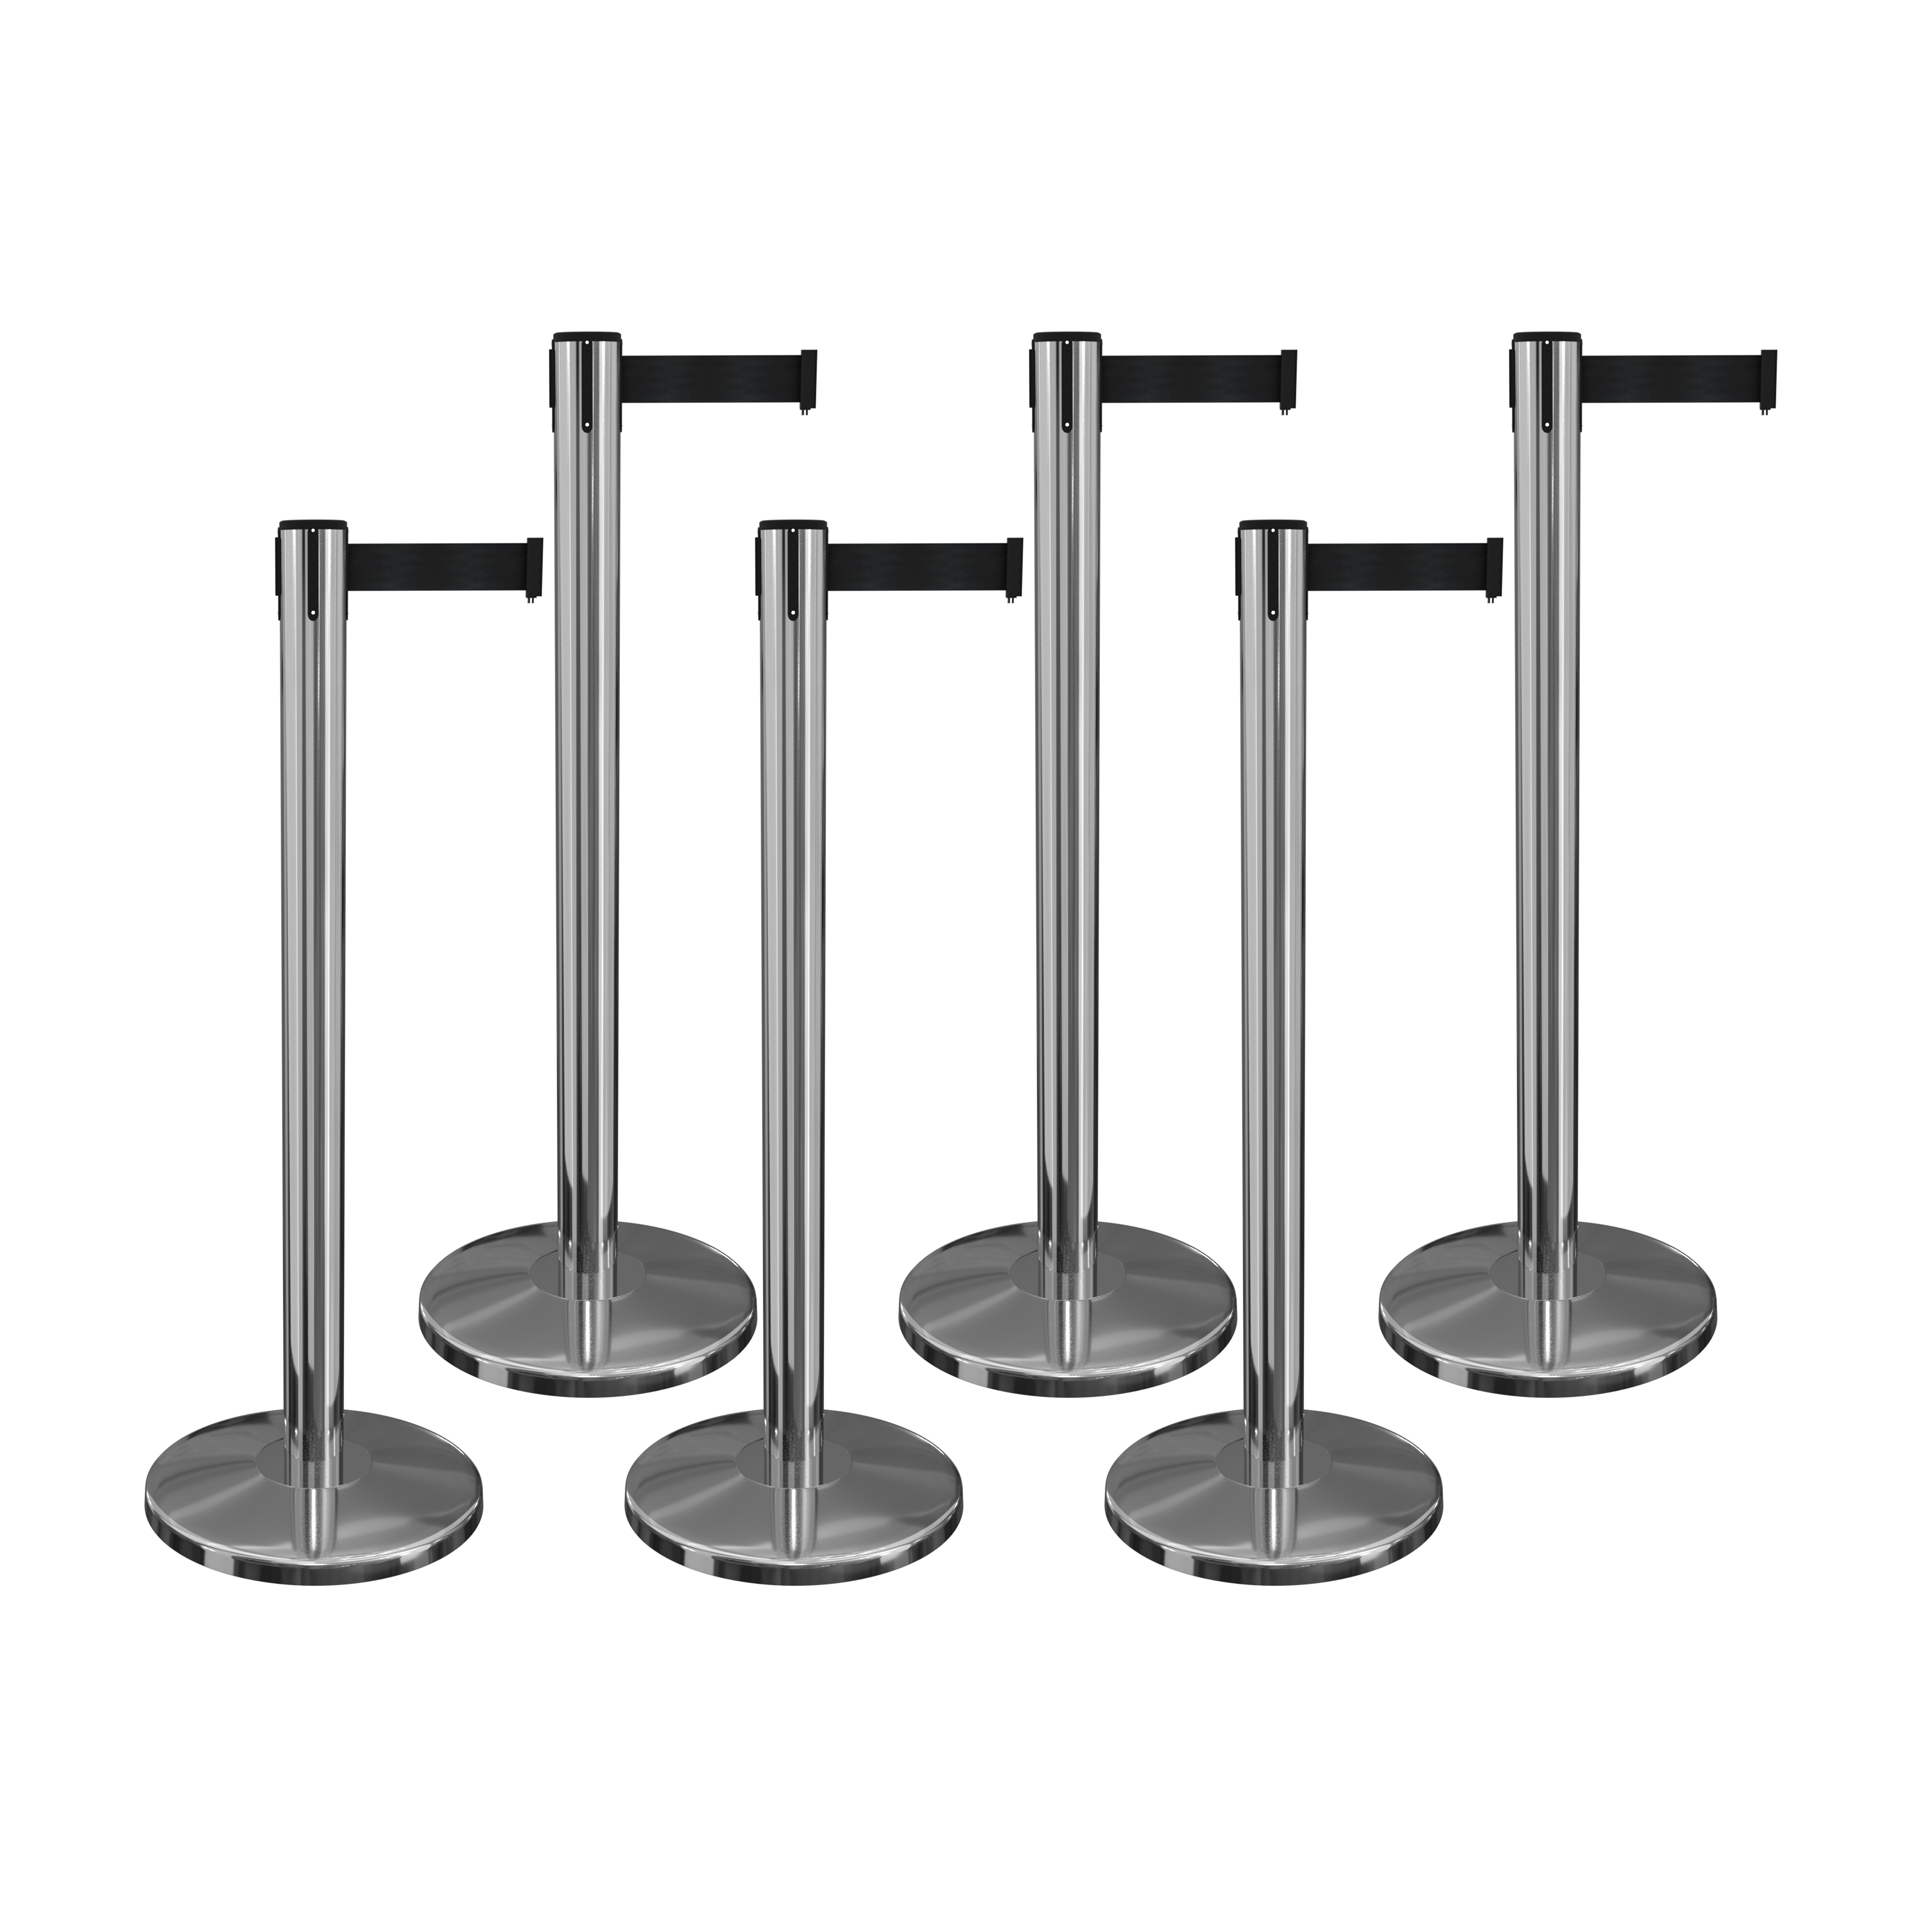 What Are The Applications Of Belt Stanchions?